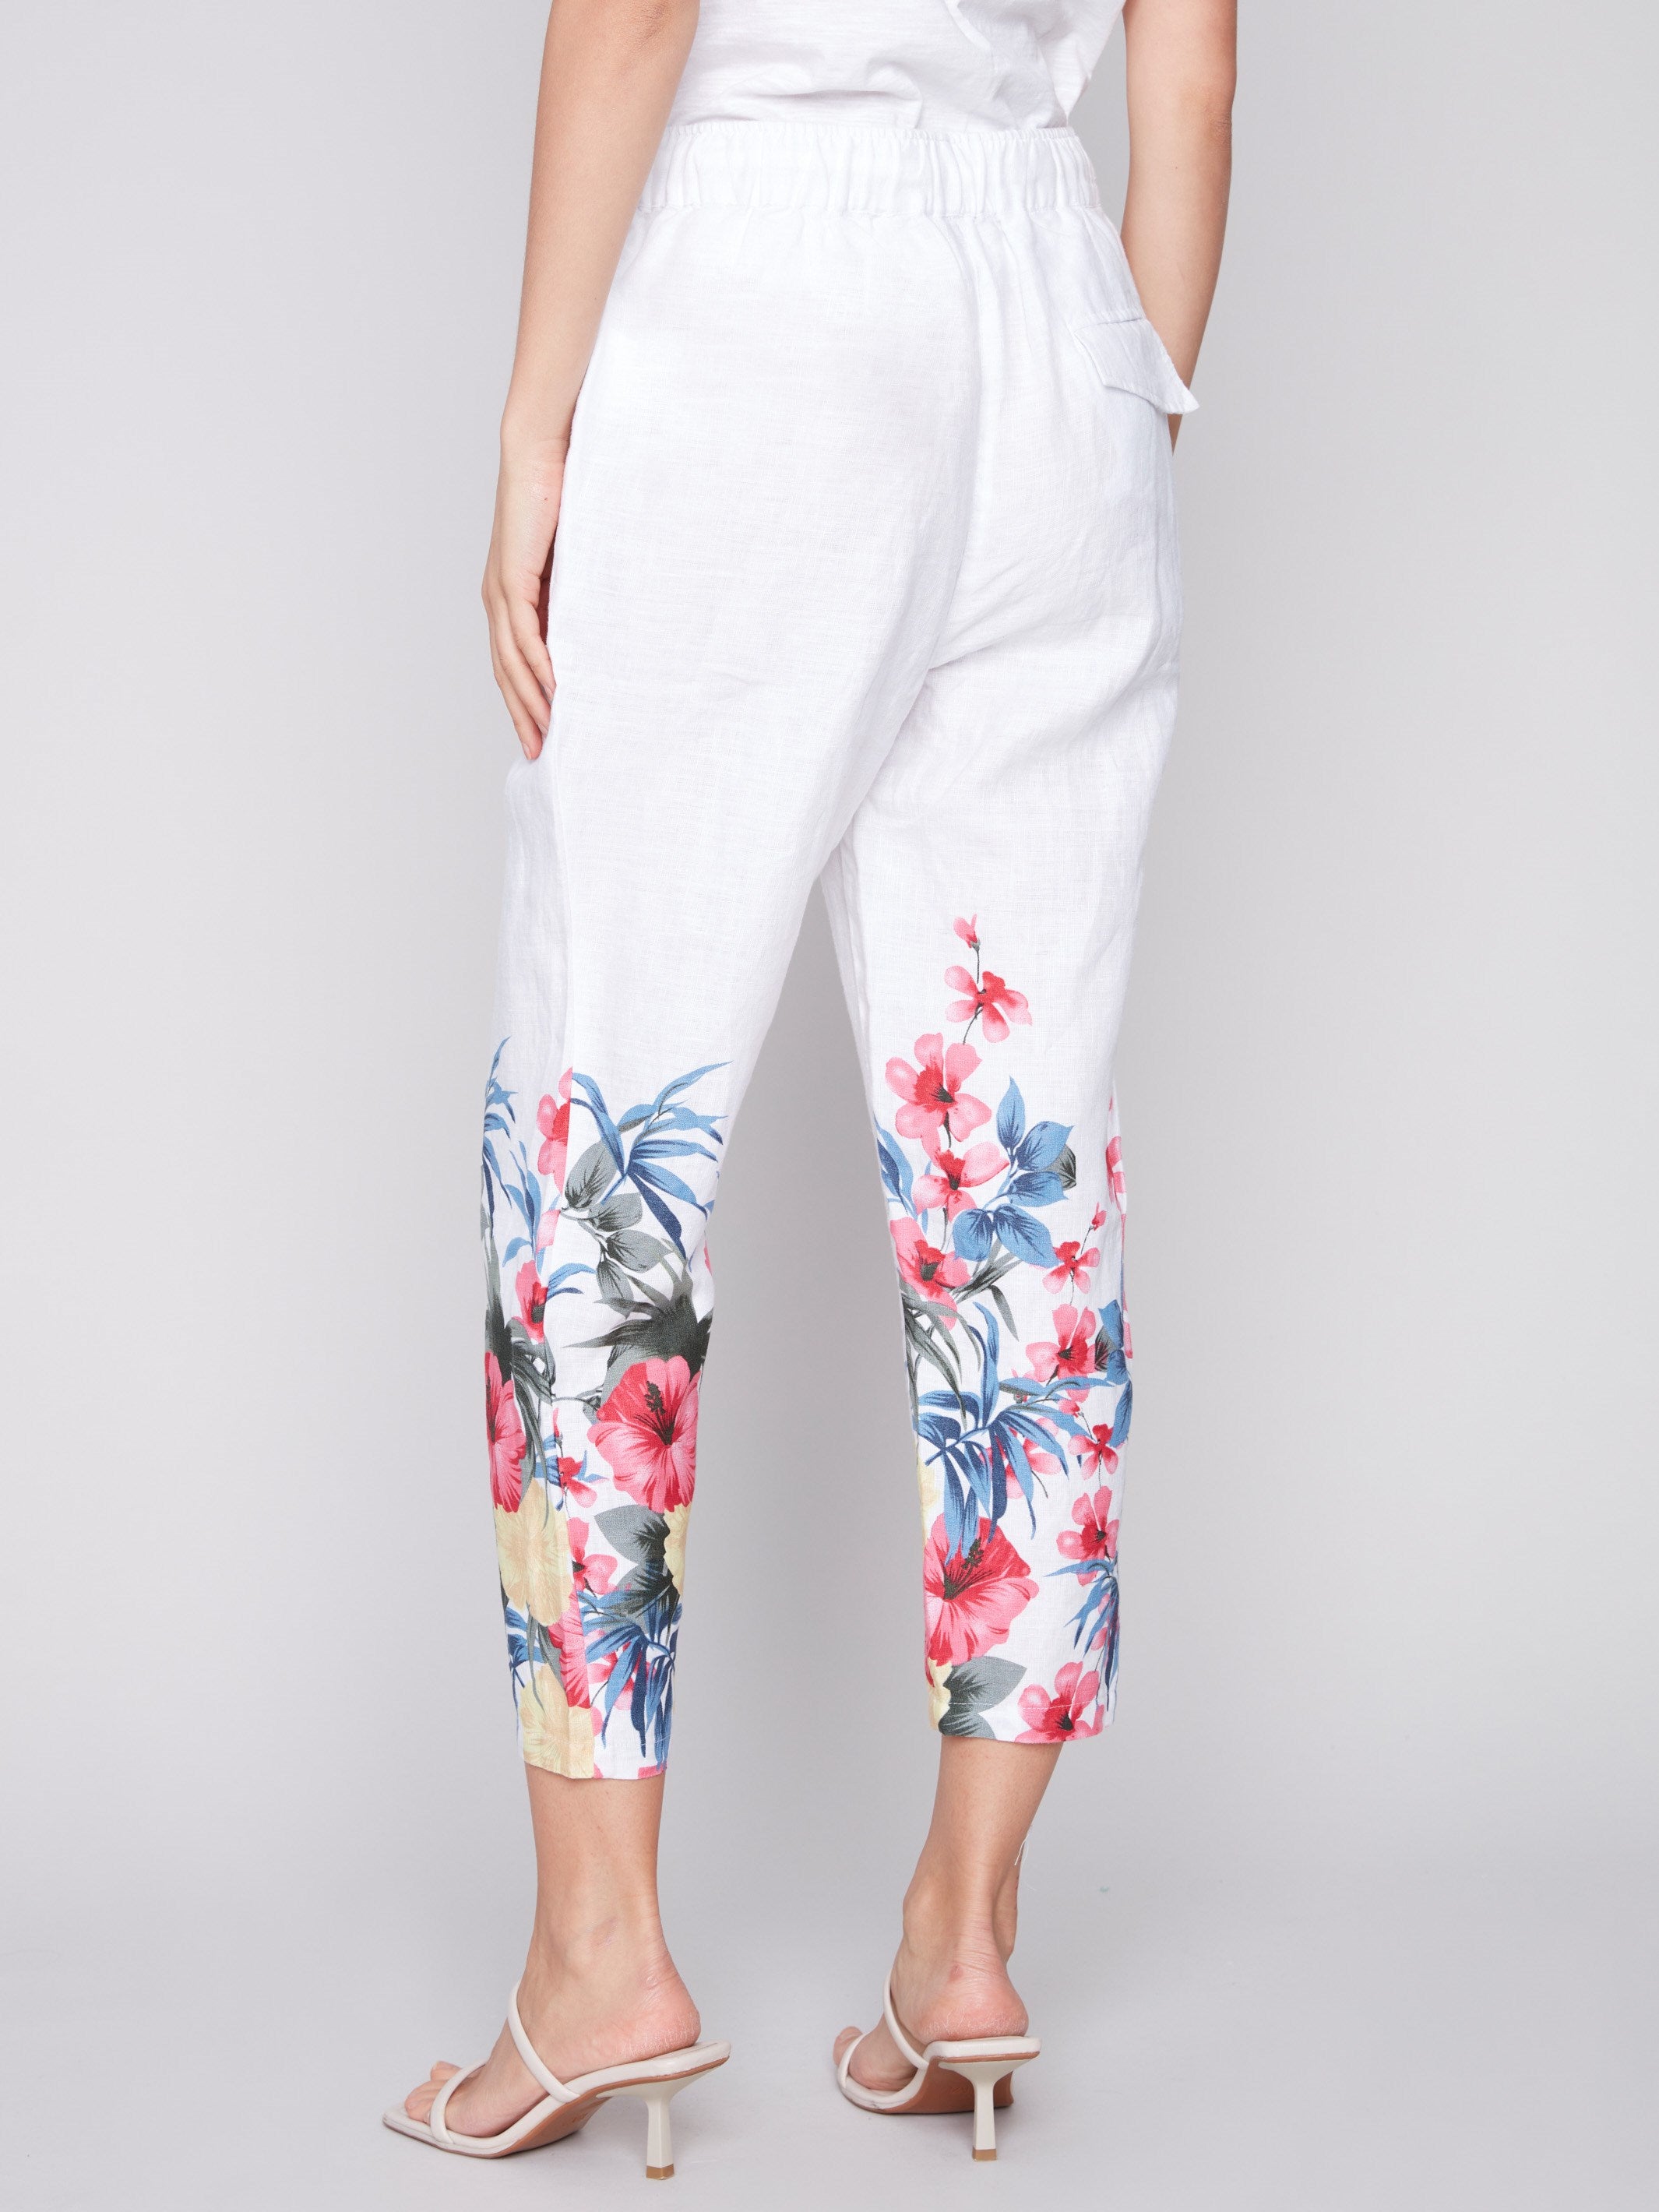 Printed Linen Pull-On Pants - Maui - Charlie B Collection Canada - Image 3